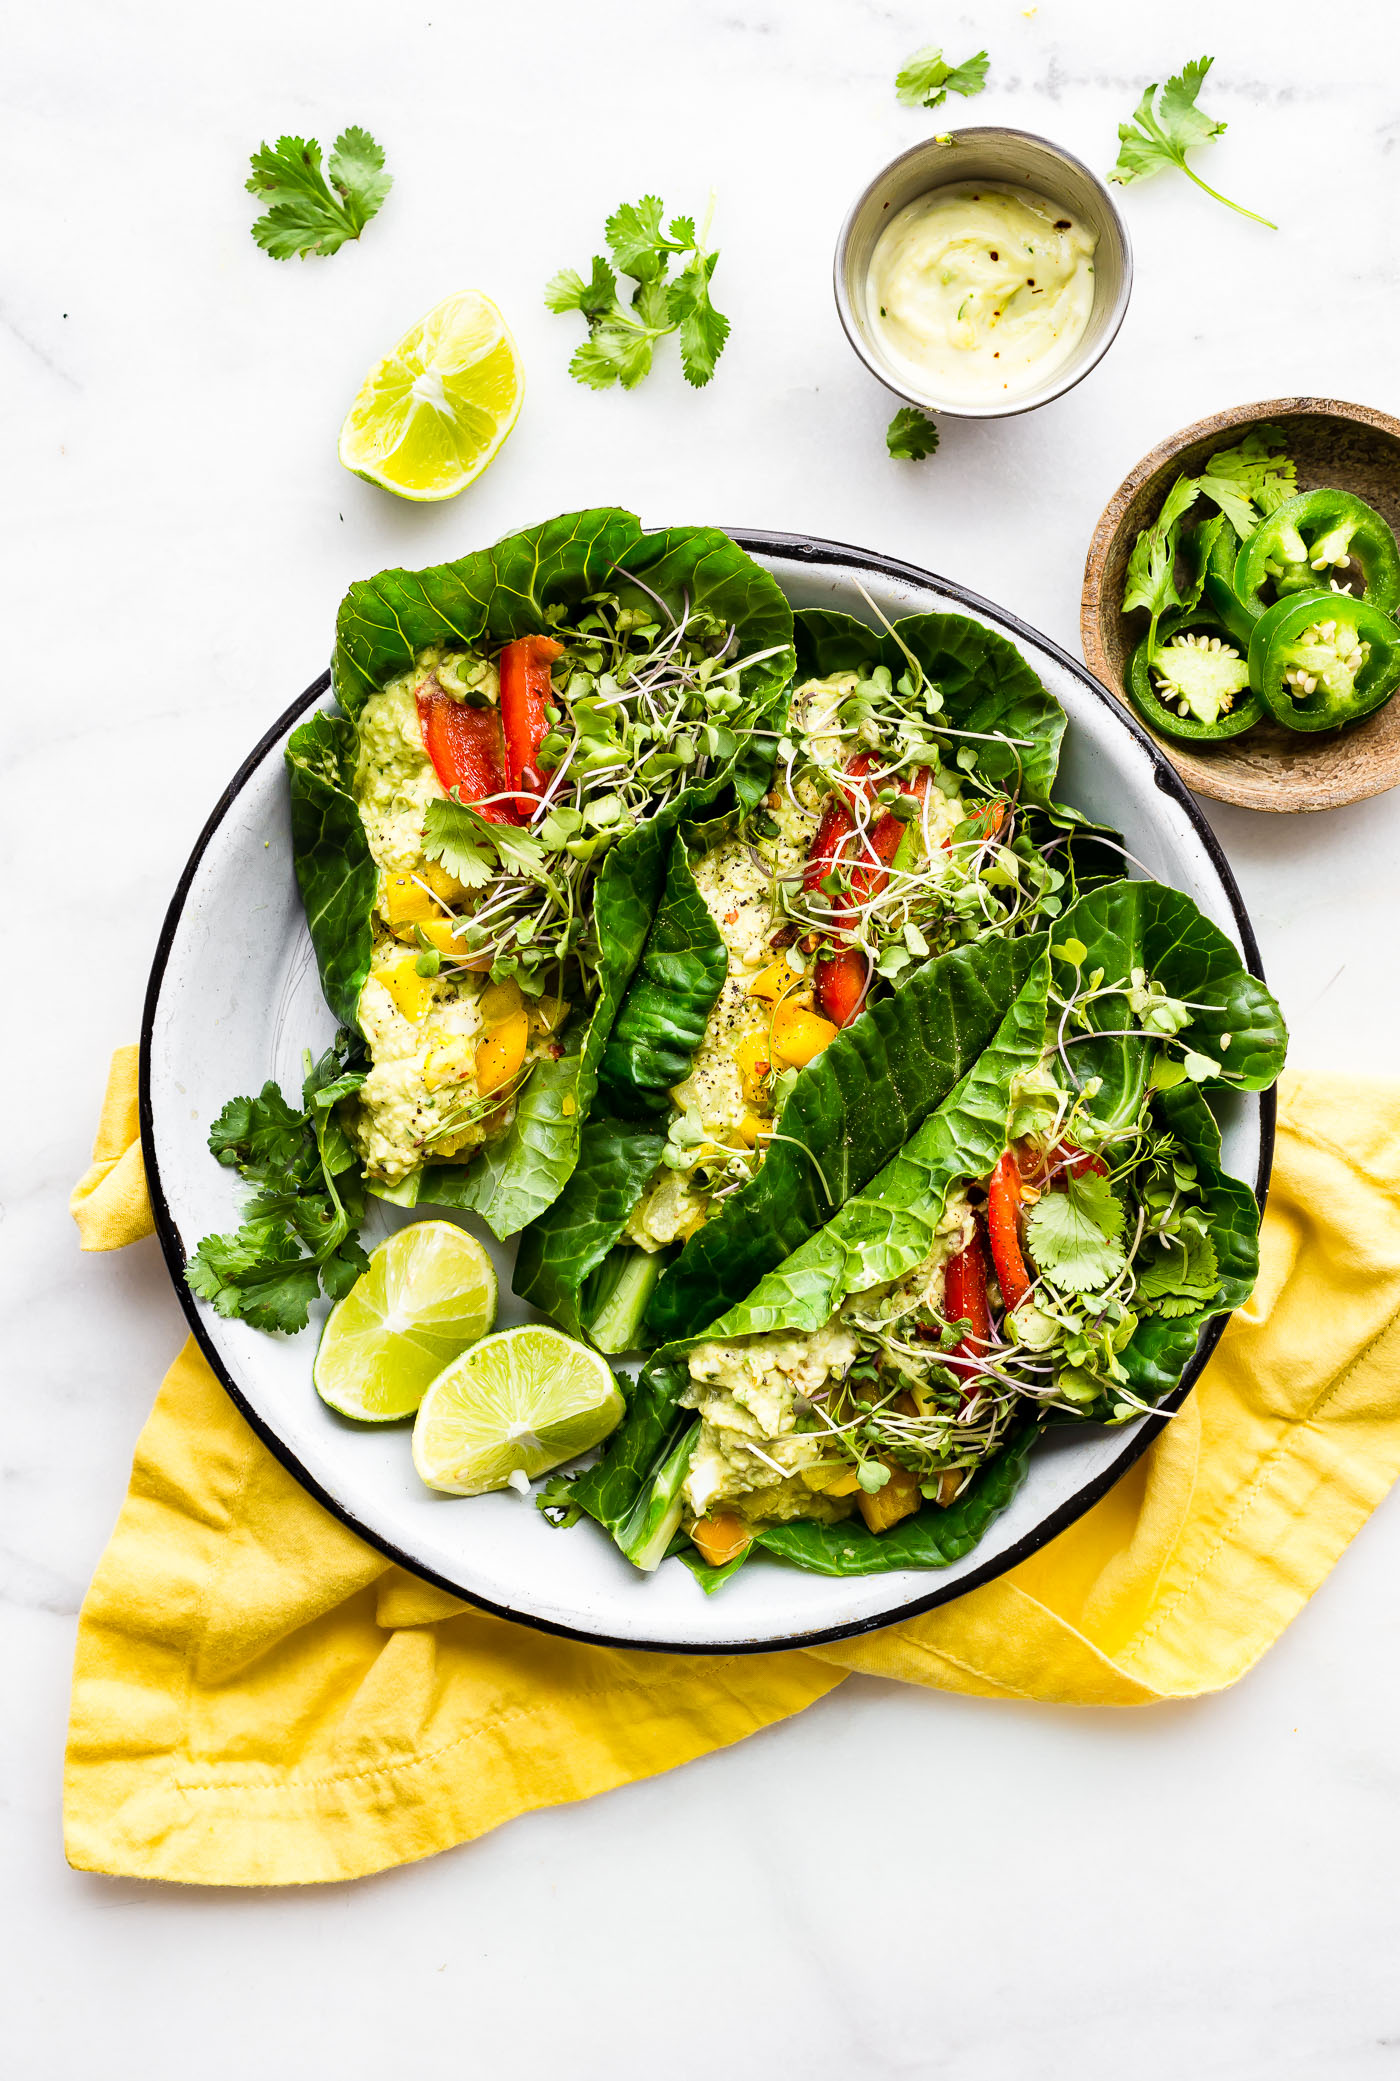 These Mexican avocado egg salad wraps make for a perfect low carb veggie packed lunch! Paleo Avocado Egg Salad seasoned with Mexican spices and jalapeño, then all wrapped up in collard greens! Whole 30 friendly.